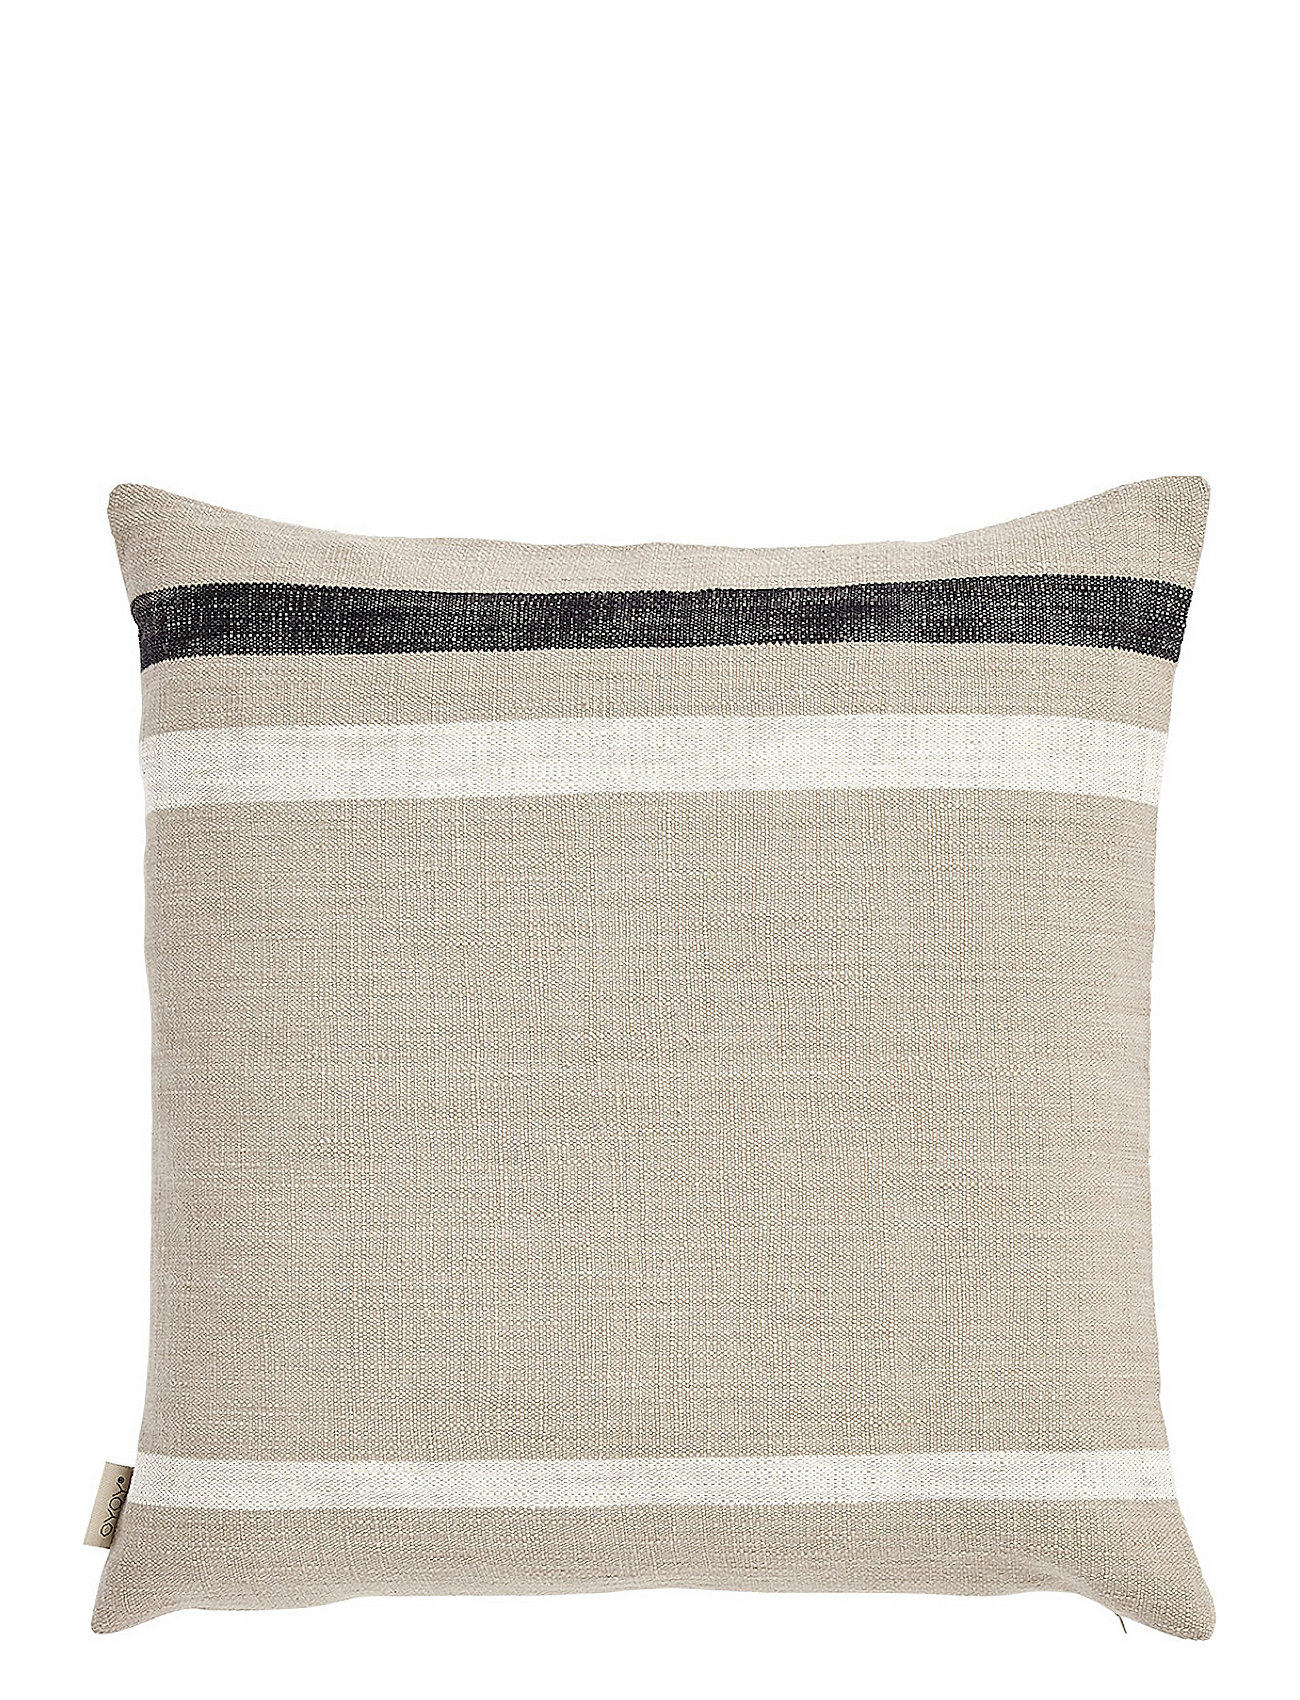 "OYOY Living Design" "Sofuto Cushion Cover Square Home Textiles Cushions & Blankets Covers Beige OYOY